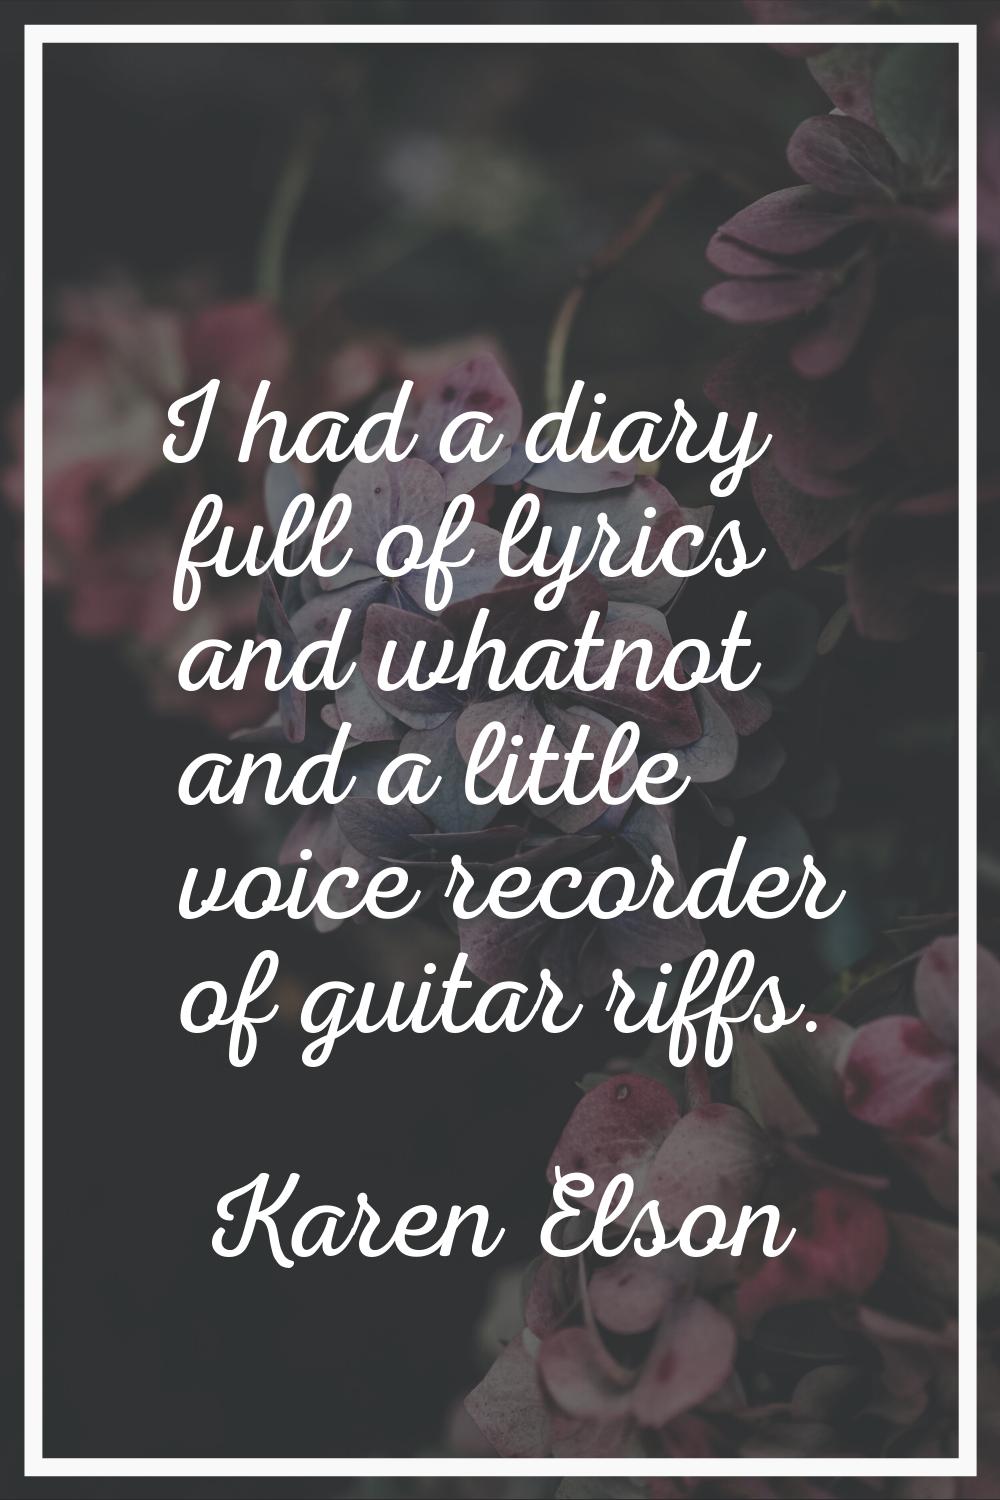 I had a diary full of lyrics and whatnot and a little voice recorder of guitar riffs.